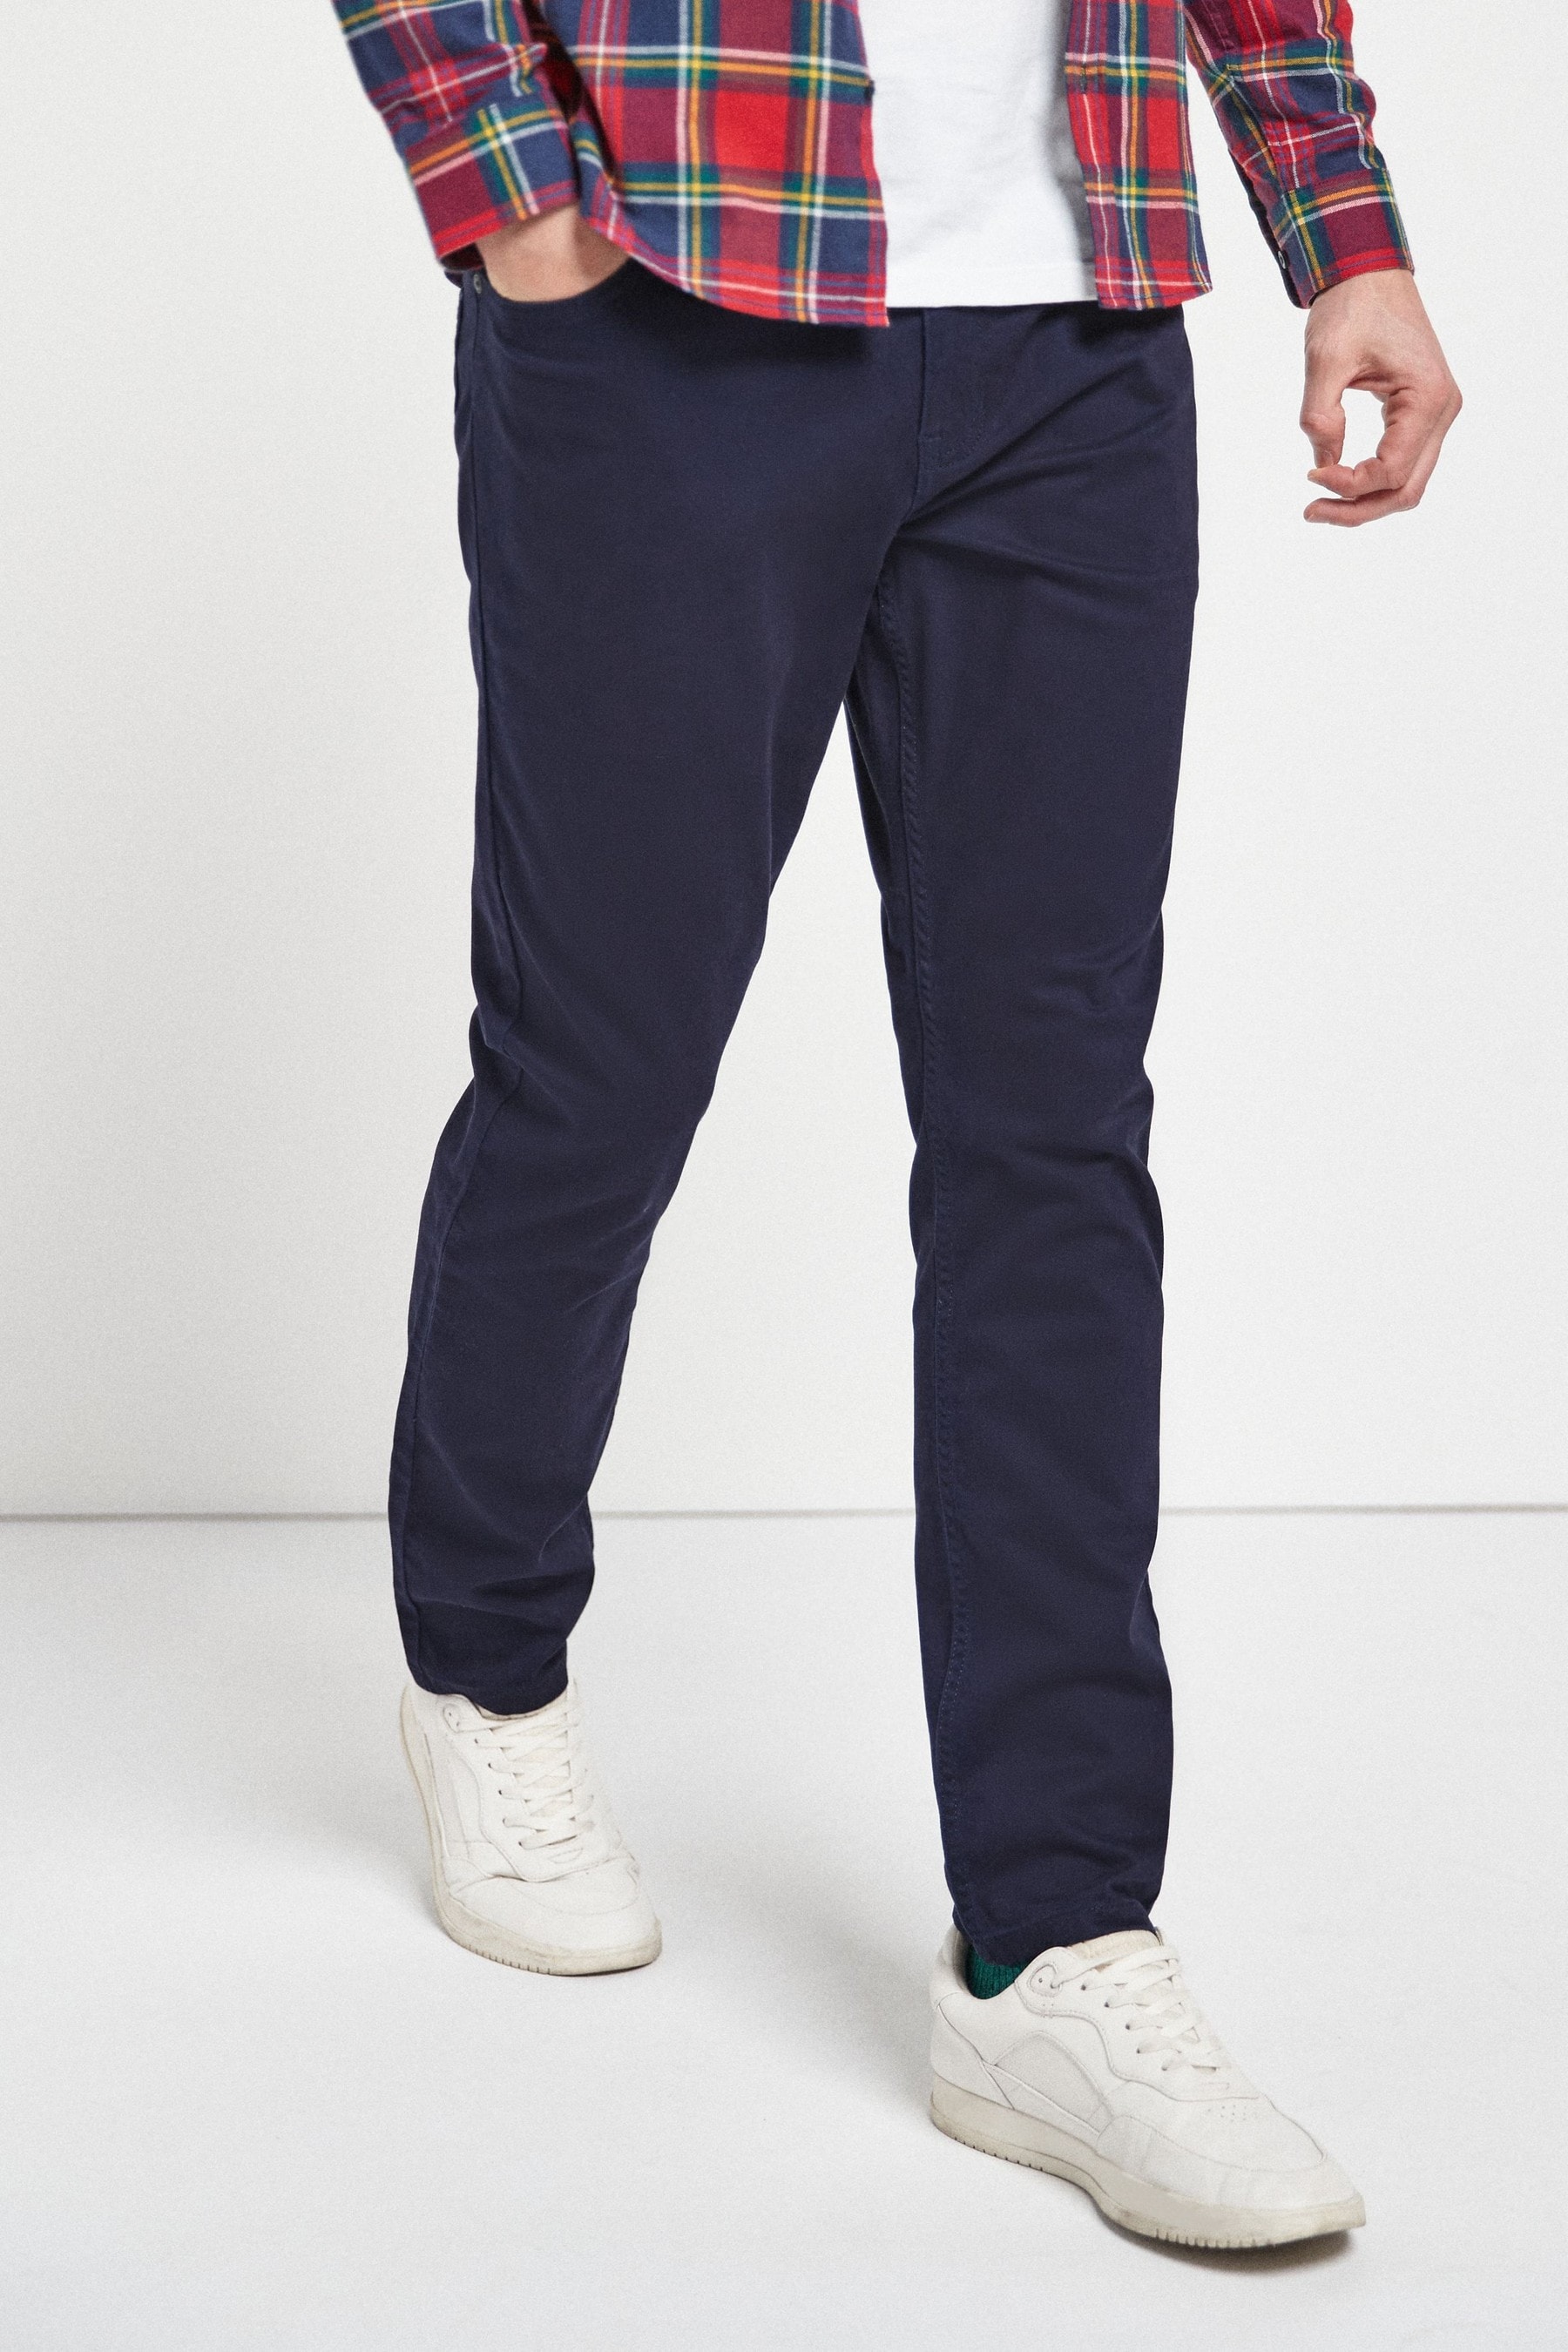 Buy Motion Flex Soft Touch Trousers from the Next UK online shop